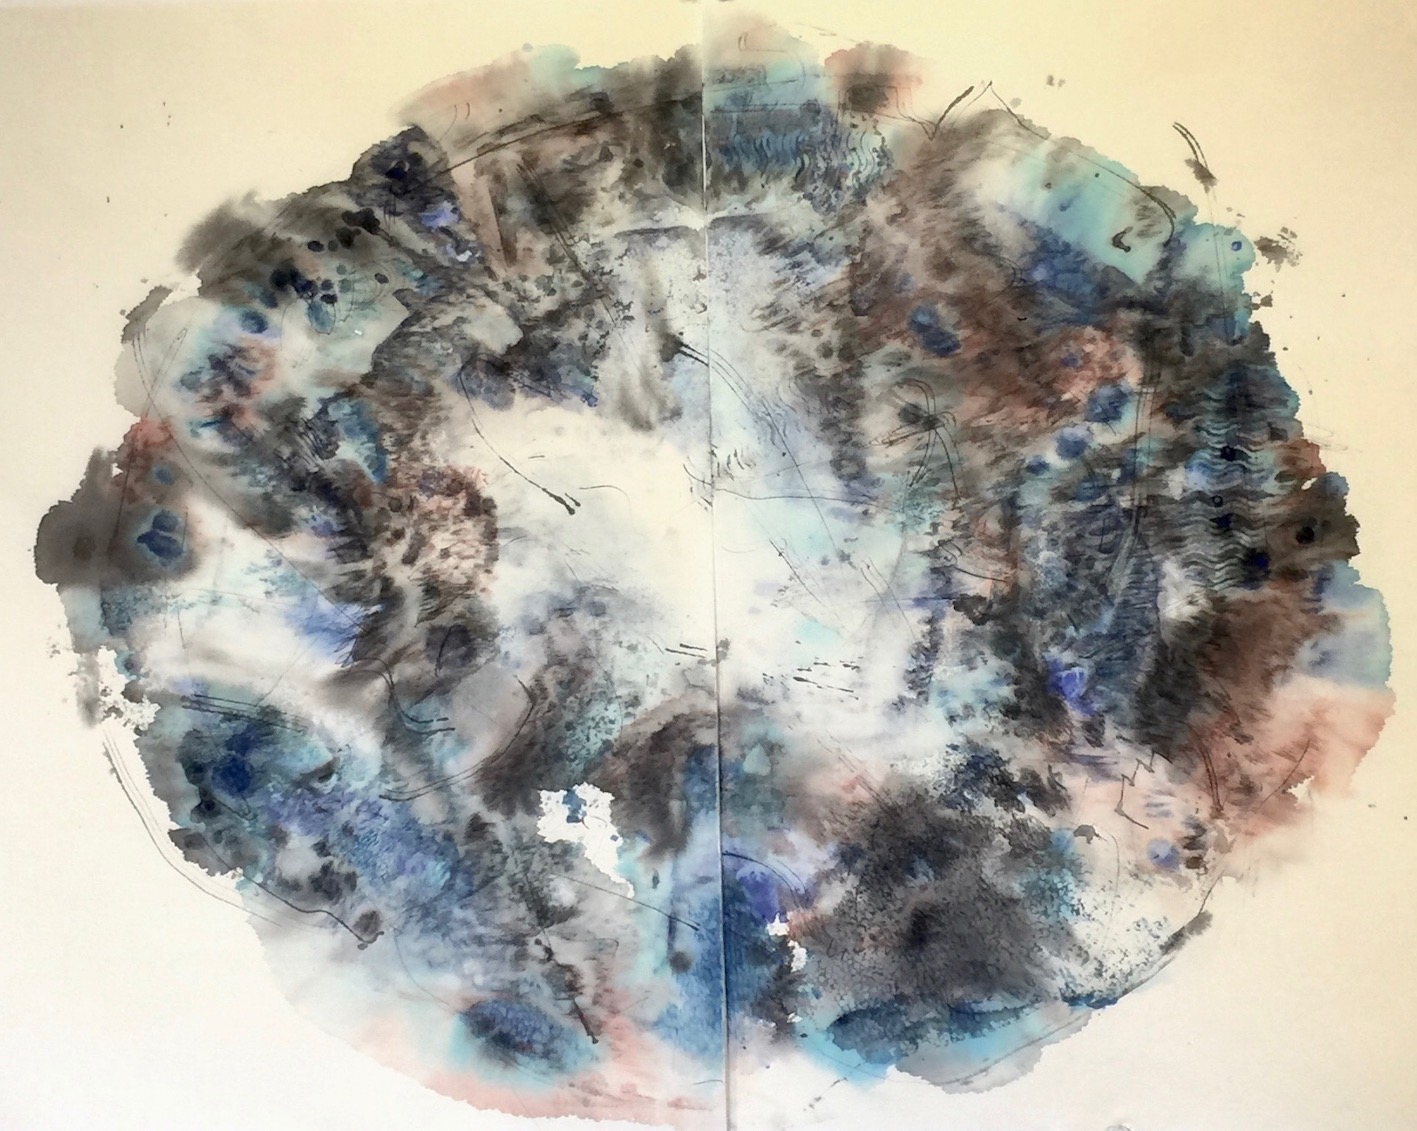 Cloud to the Sky 空への入門雲　　　72 X 98 cm Sumi ink,water colour, acrylic 墨、水彩絵具、アクリル　2019 jpeg